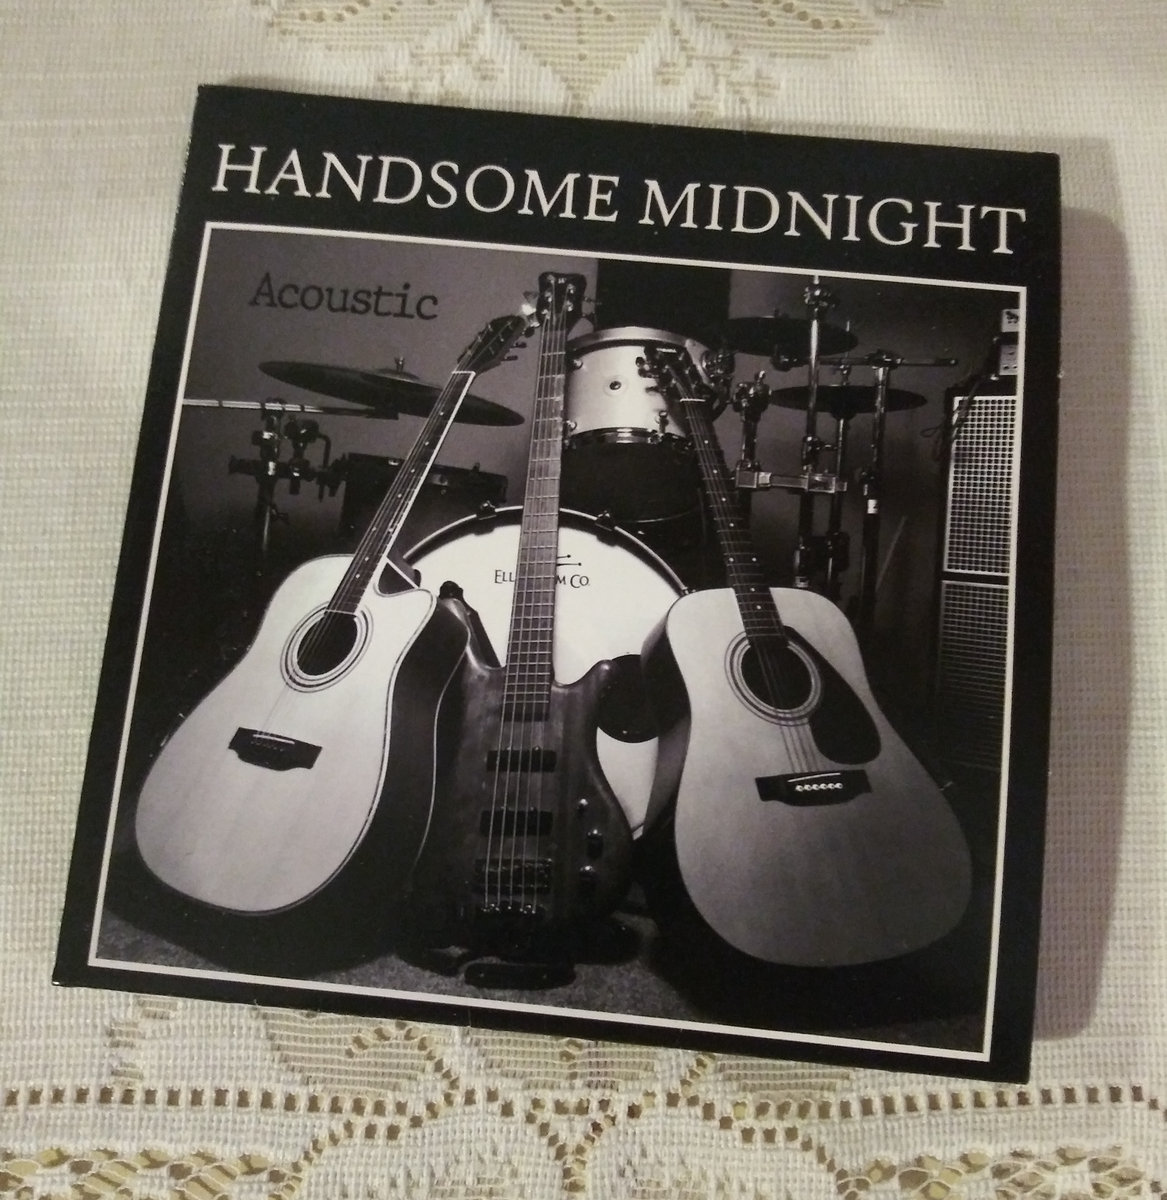 Acoustic Handsome Midnight